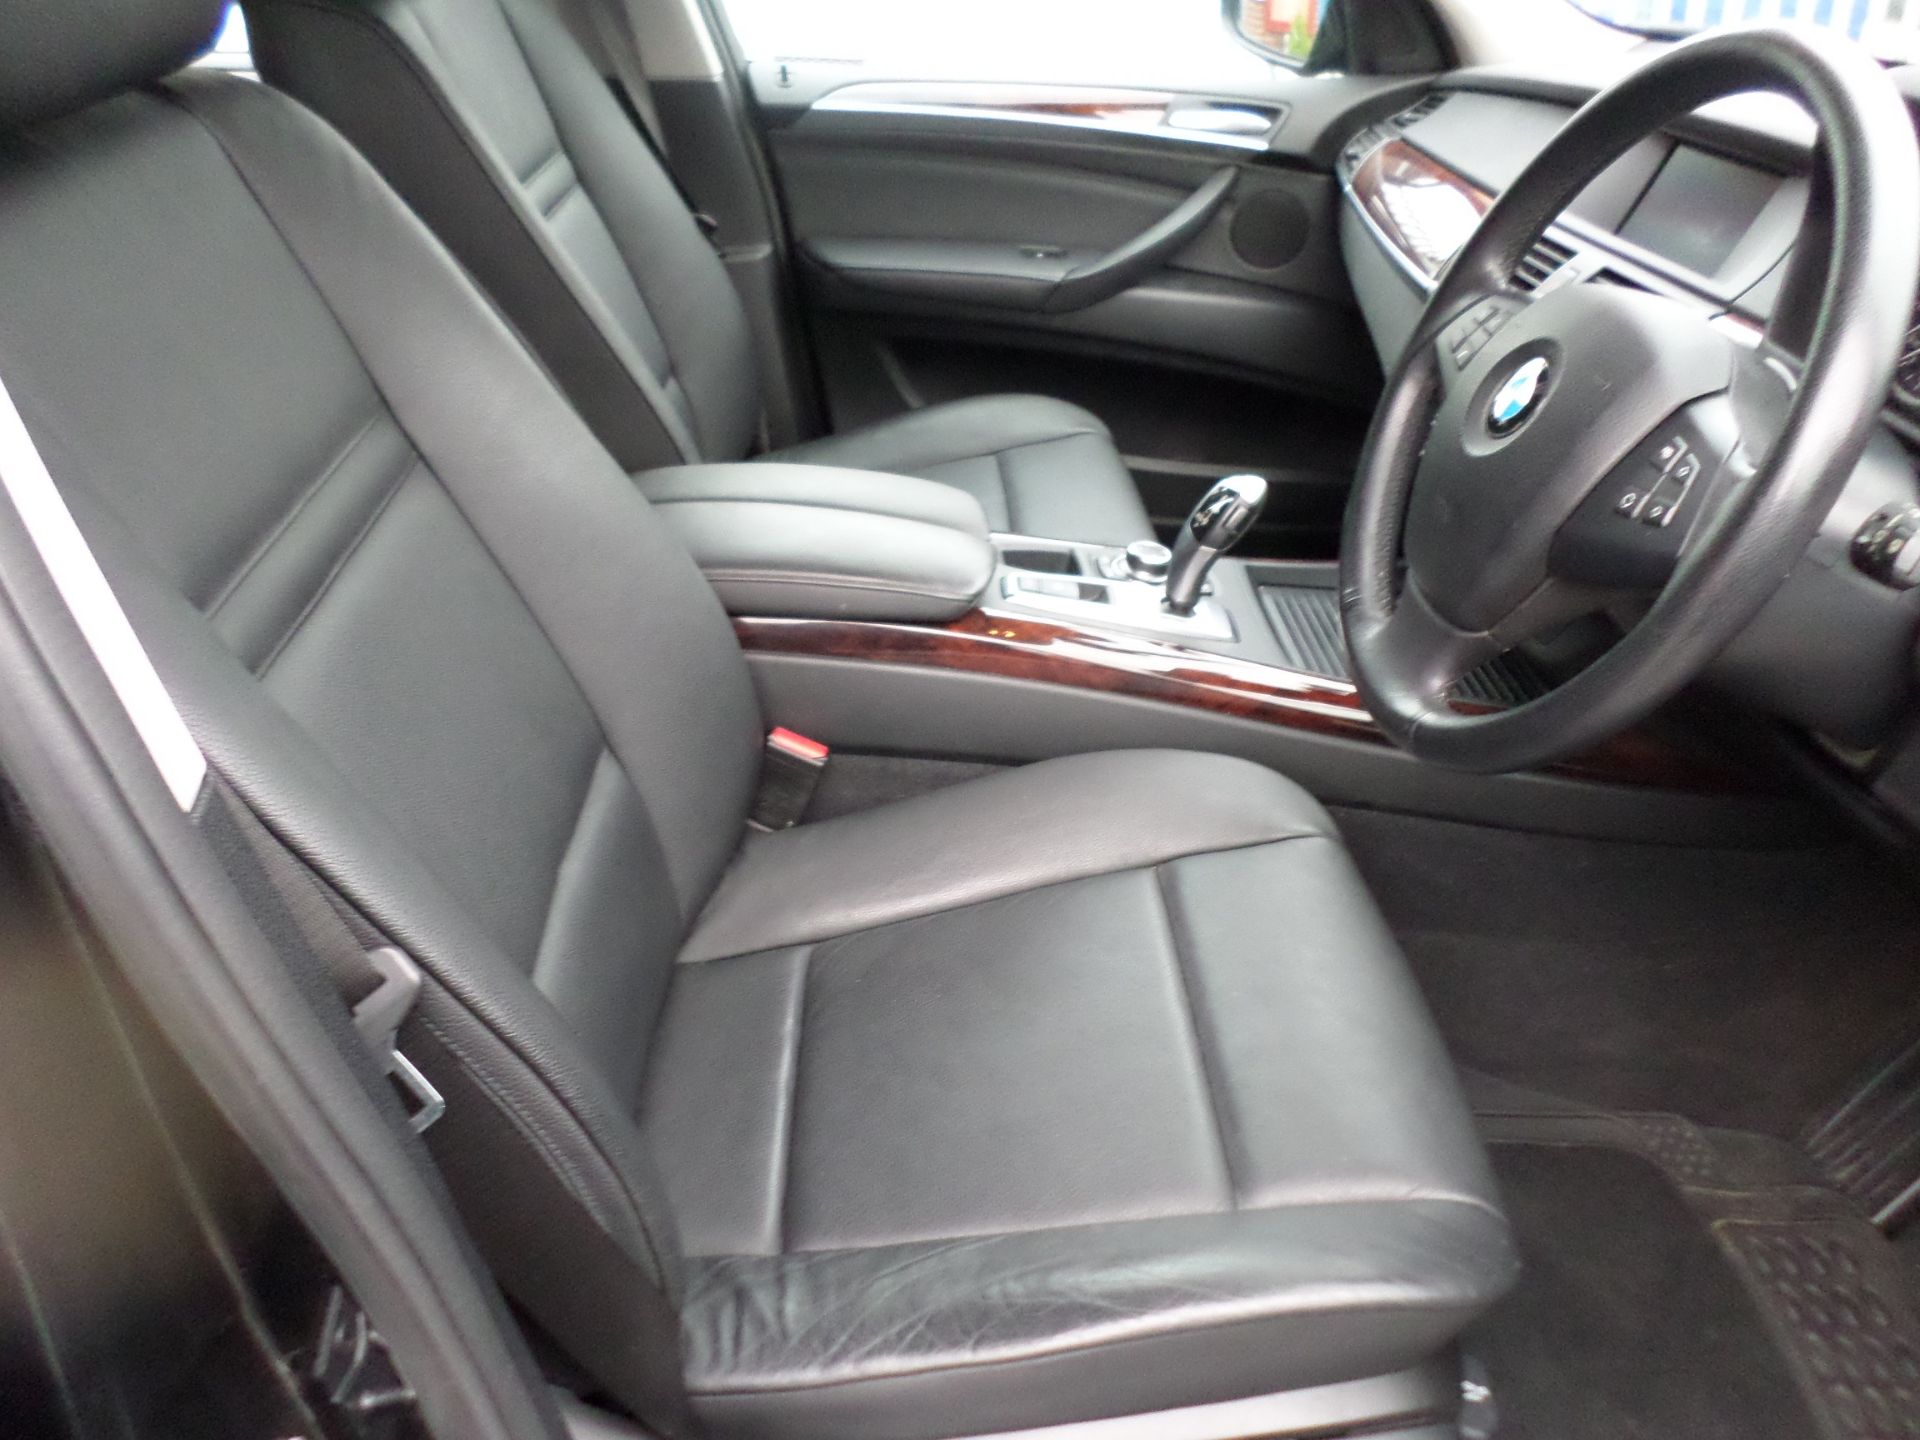 2012/12 REG BMW X5 XDRIVE 30D SE AUTOMATIC - ONLY 22K MILES, SHOWING 1 FORMER KEEPER *NO VAT* - Image 7 of 11